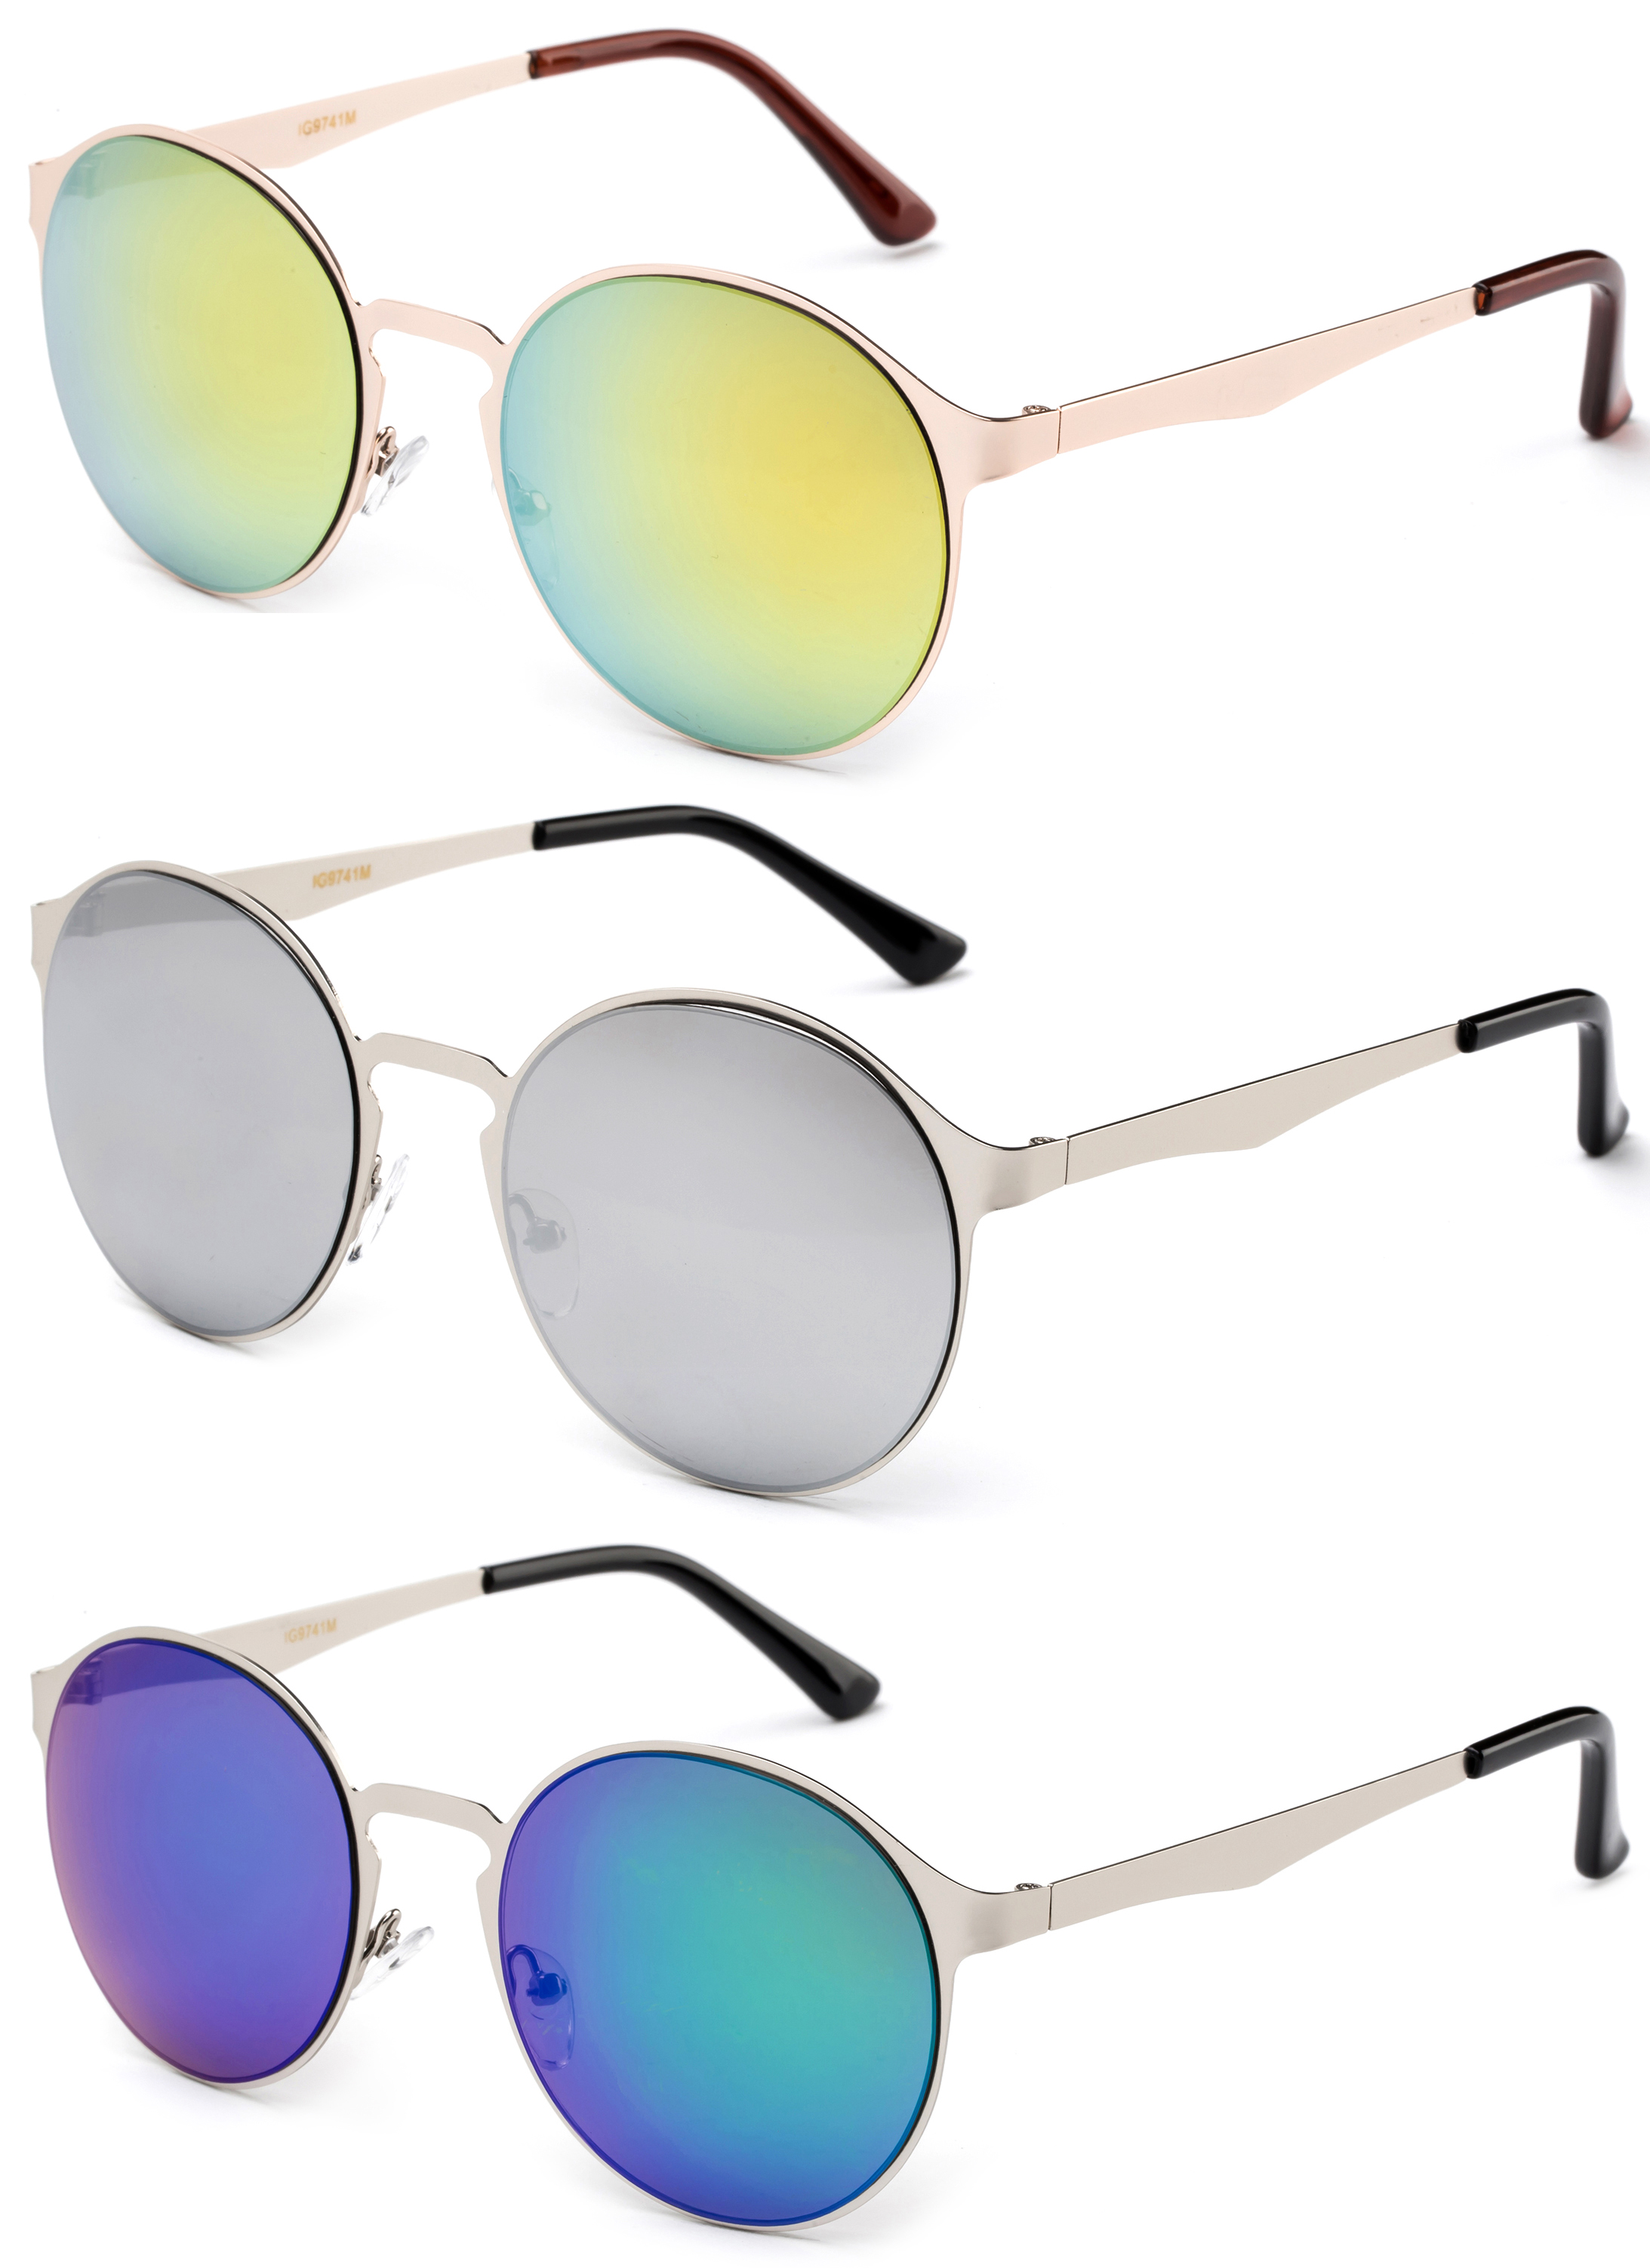 3 Pack Metal One Piece Round Frame Fashion Sunglasses for Men for Women, Flash Mirror - image 2 of 2